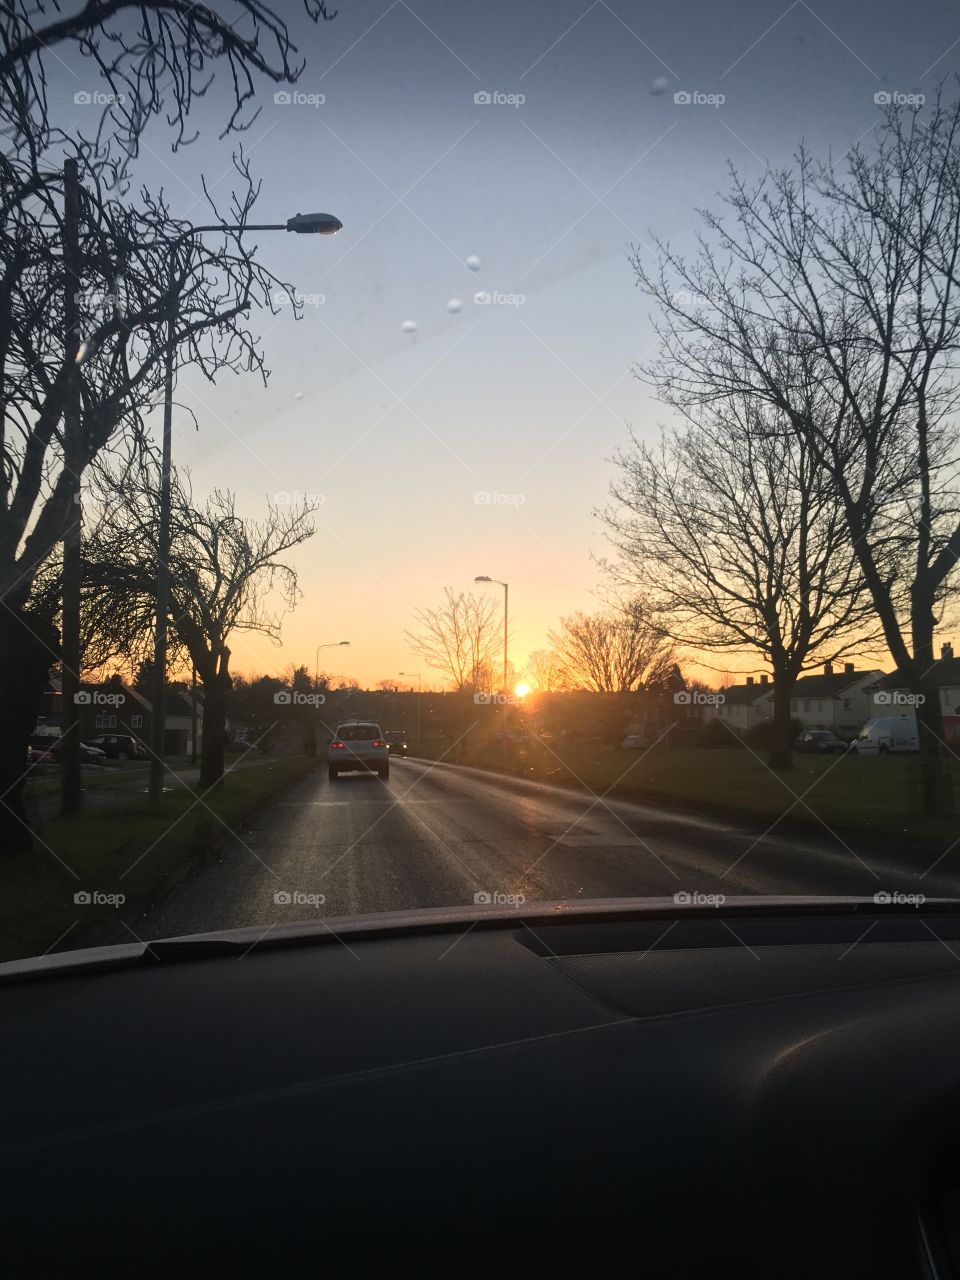 A lovely sunrise on a Winter morning drive❤️